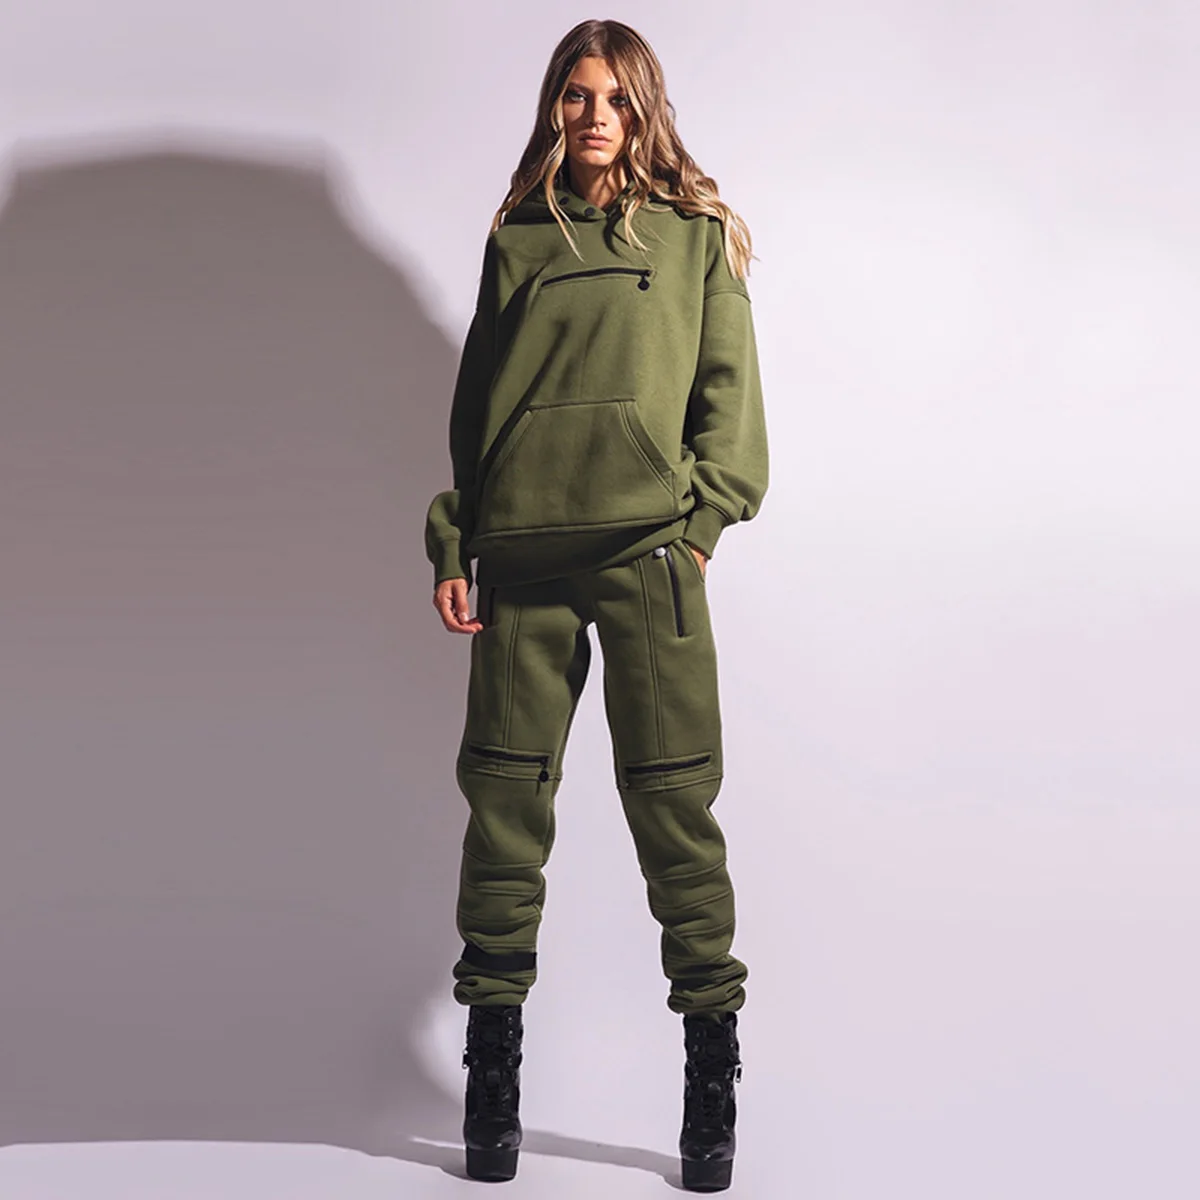 

Uoozee 2022 New Female Stylish High-Waisted Army Green Zipper Casual Pants Fitness Sports Bottoms For Women